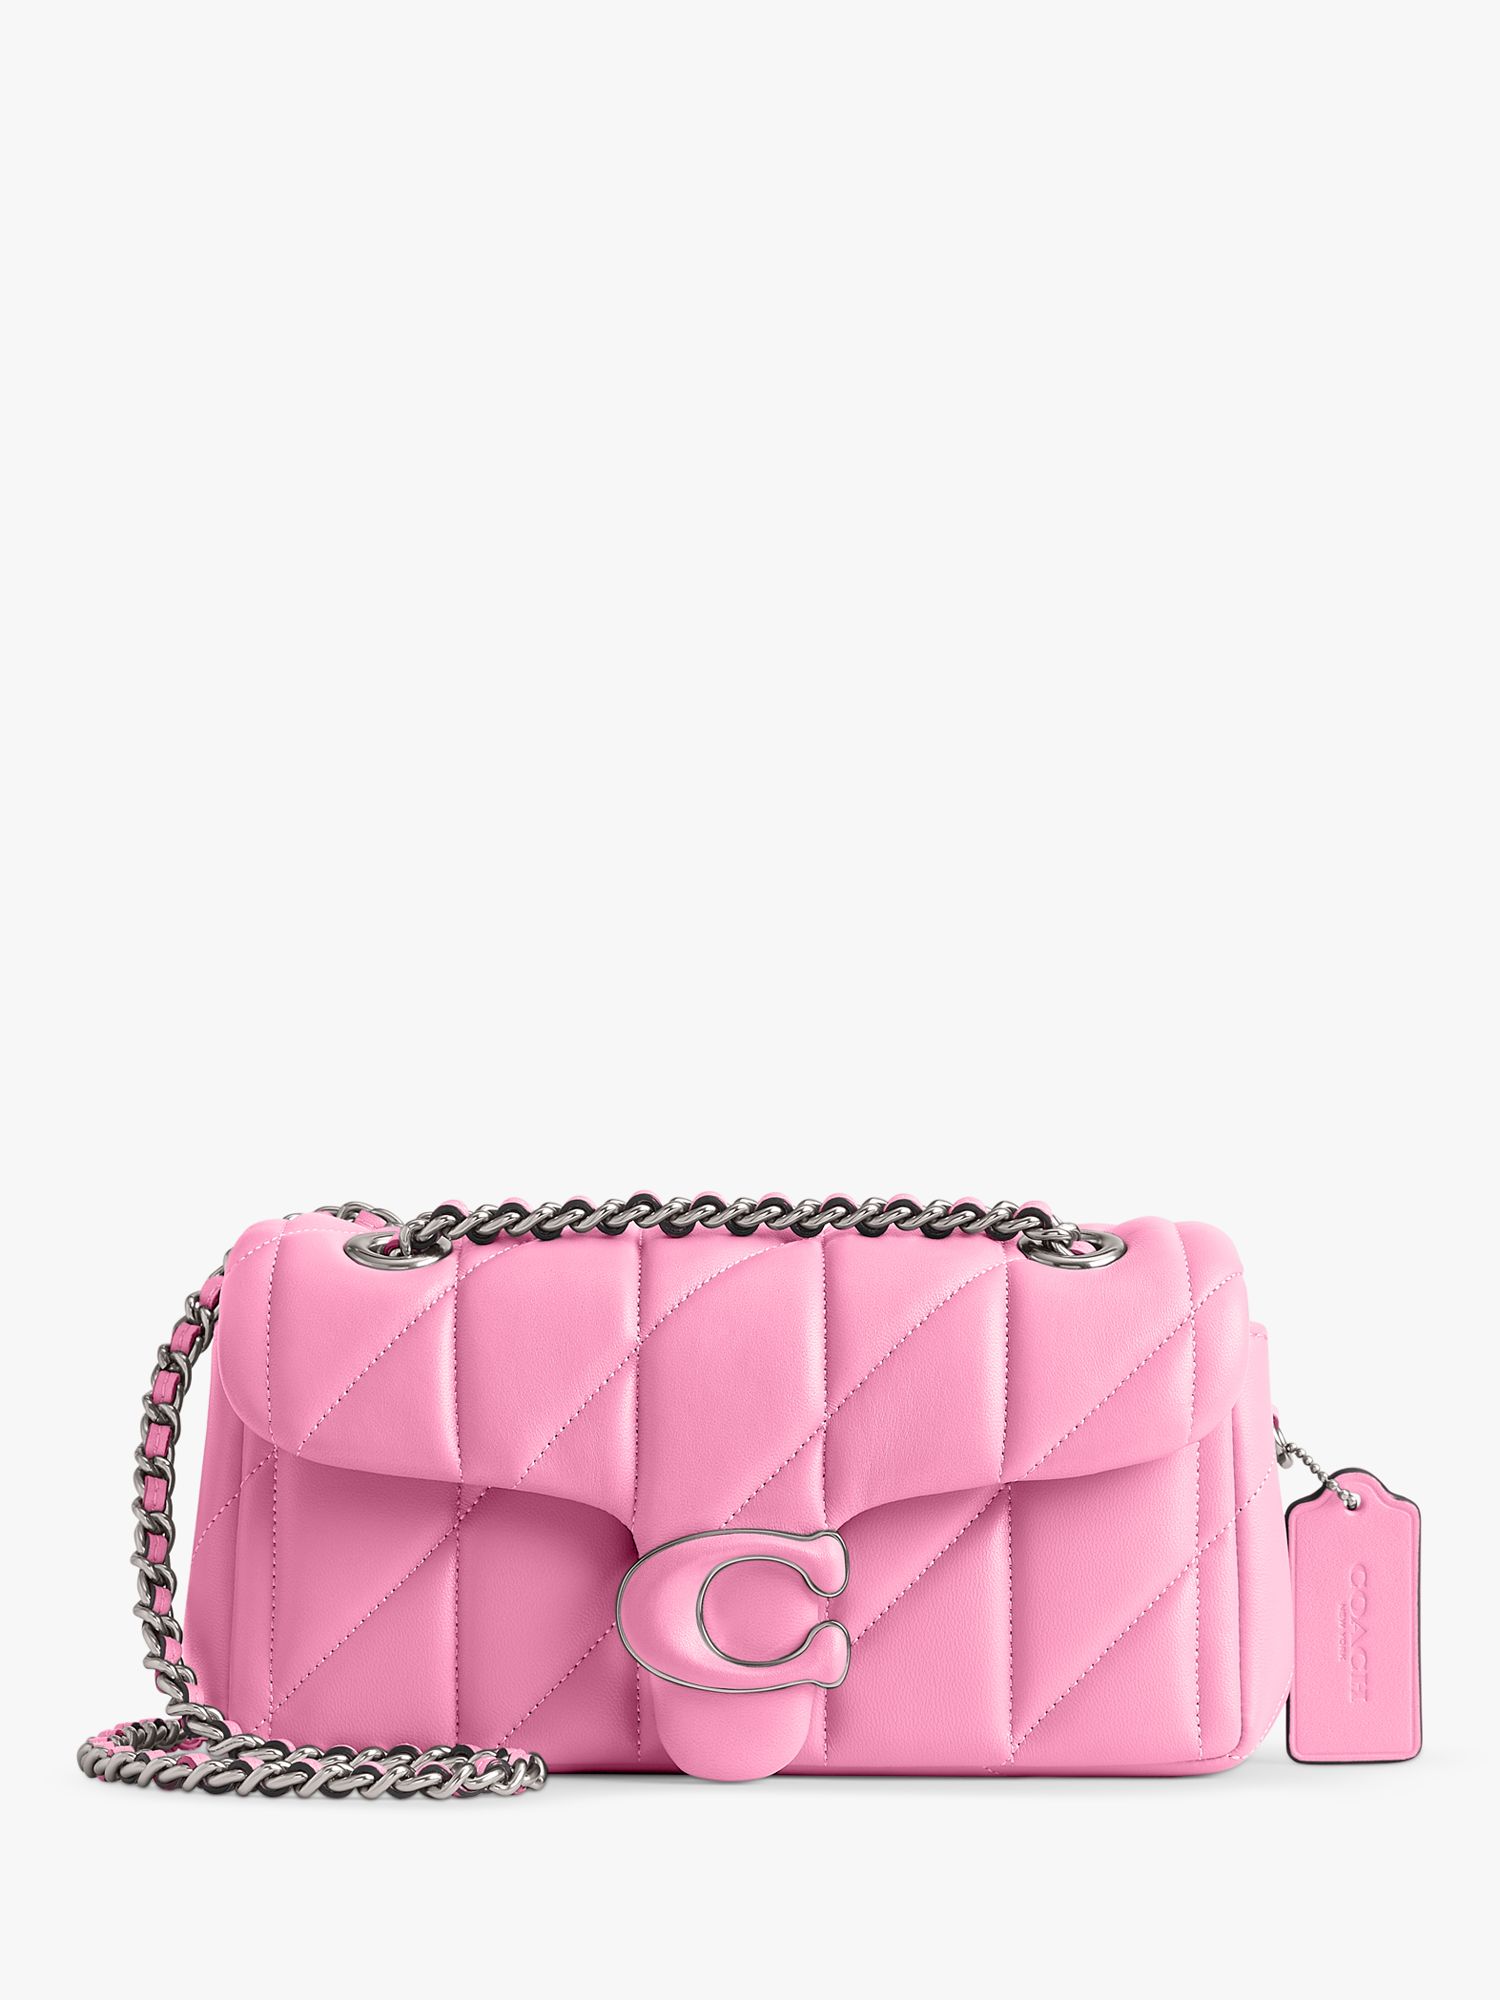 Coach Tabby 20 Quilted Leather Chain Strap Cross Body Bag, Vivid Pink